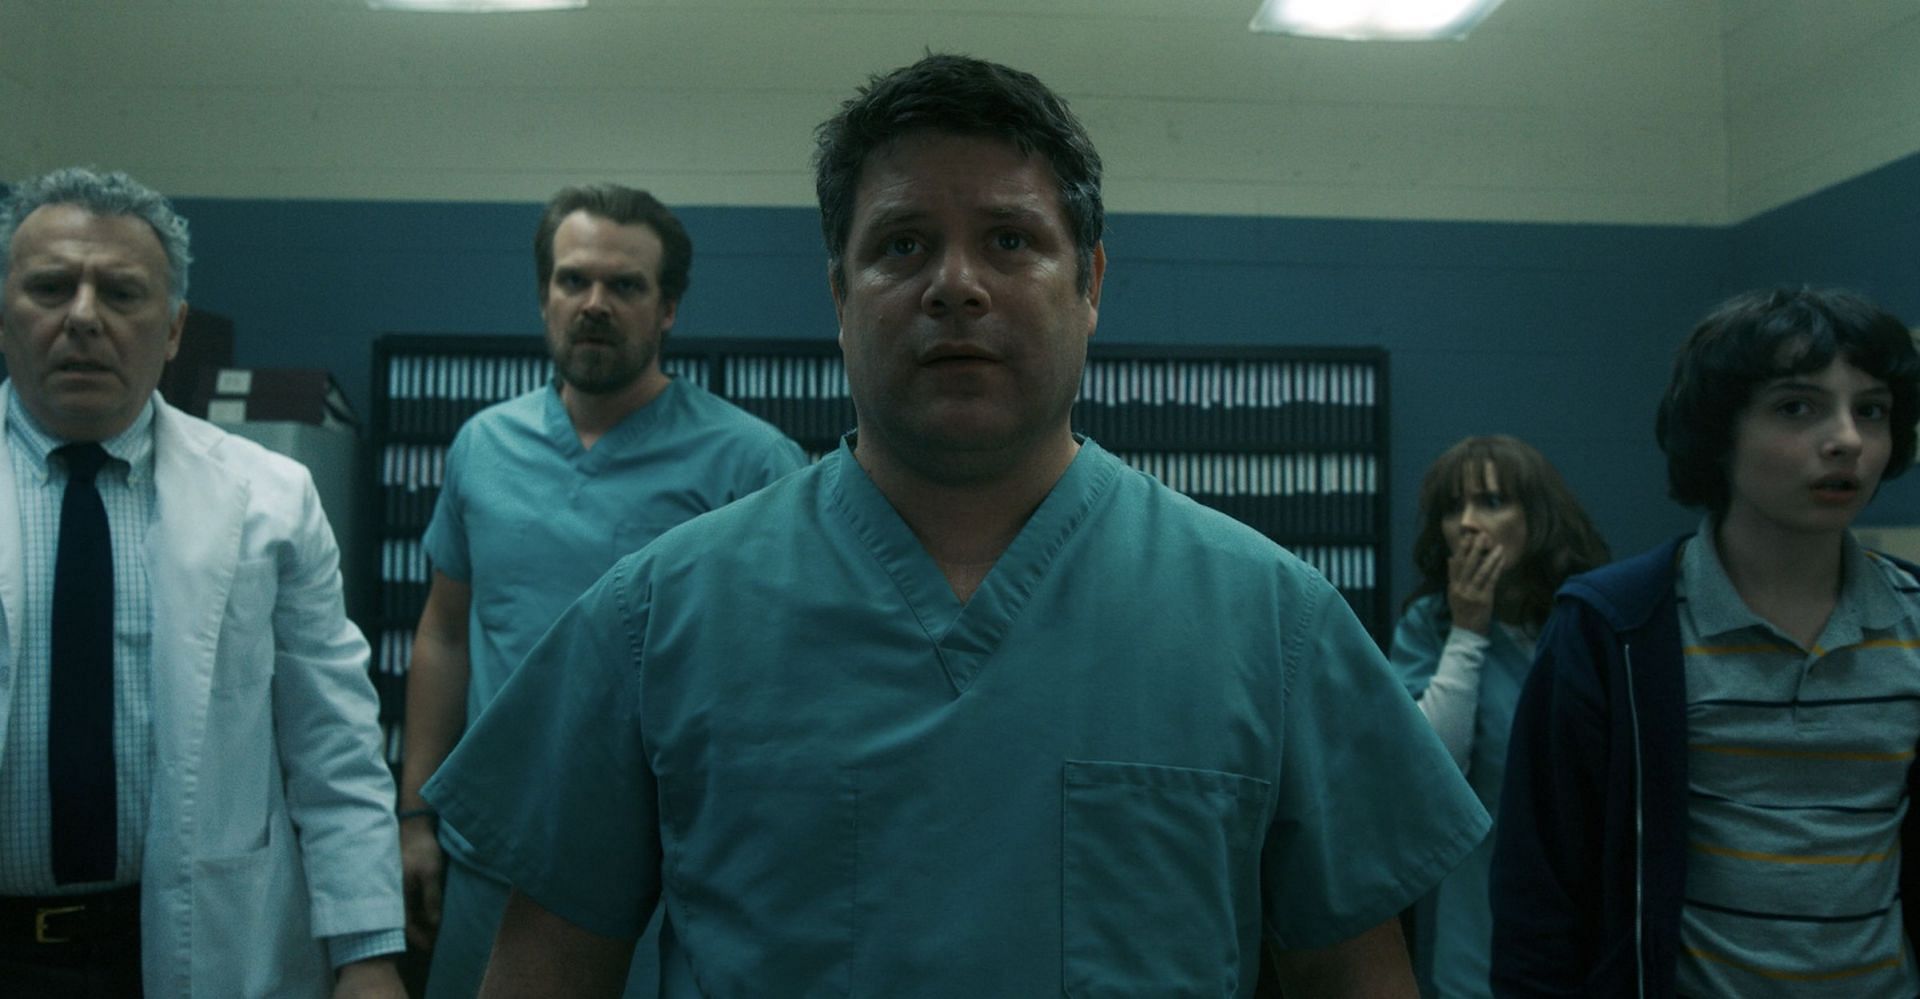 Bob Newby (played by Sean Astin) heroically fights against the Demodogs in The Mind Flayer episode of Stranger Things Season 2, ultimately sacrificing himself to save his loved ones (Image via Netflix)